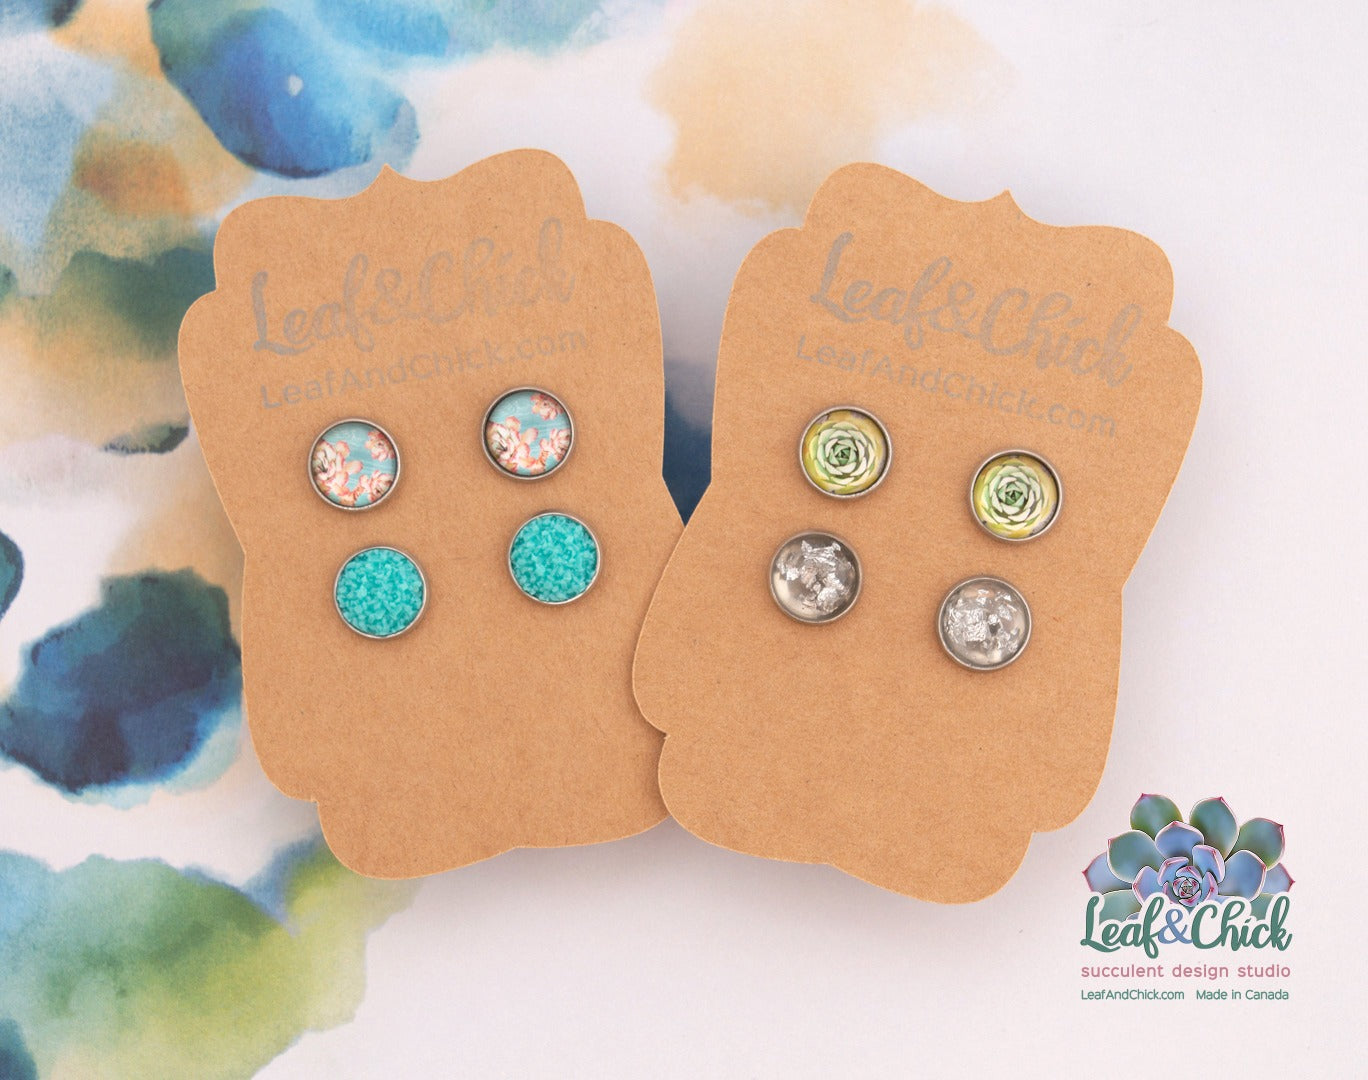 tiny stud earrings featuring succulent art